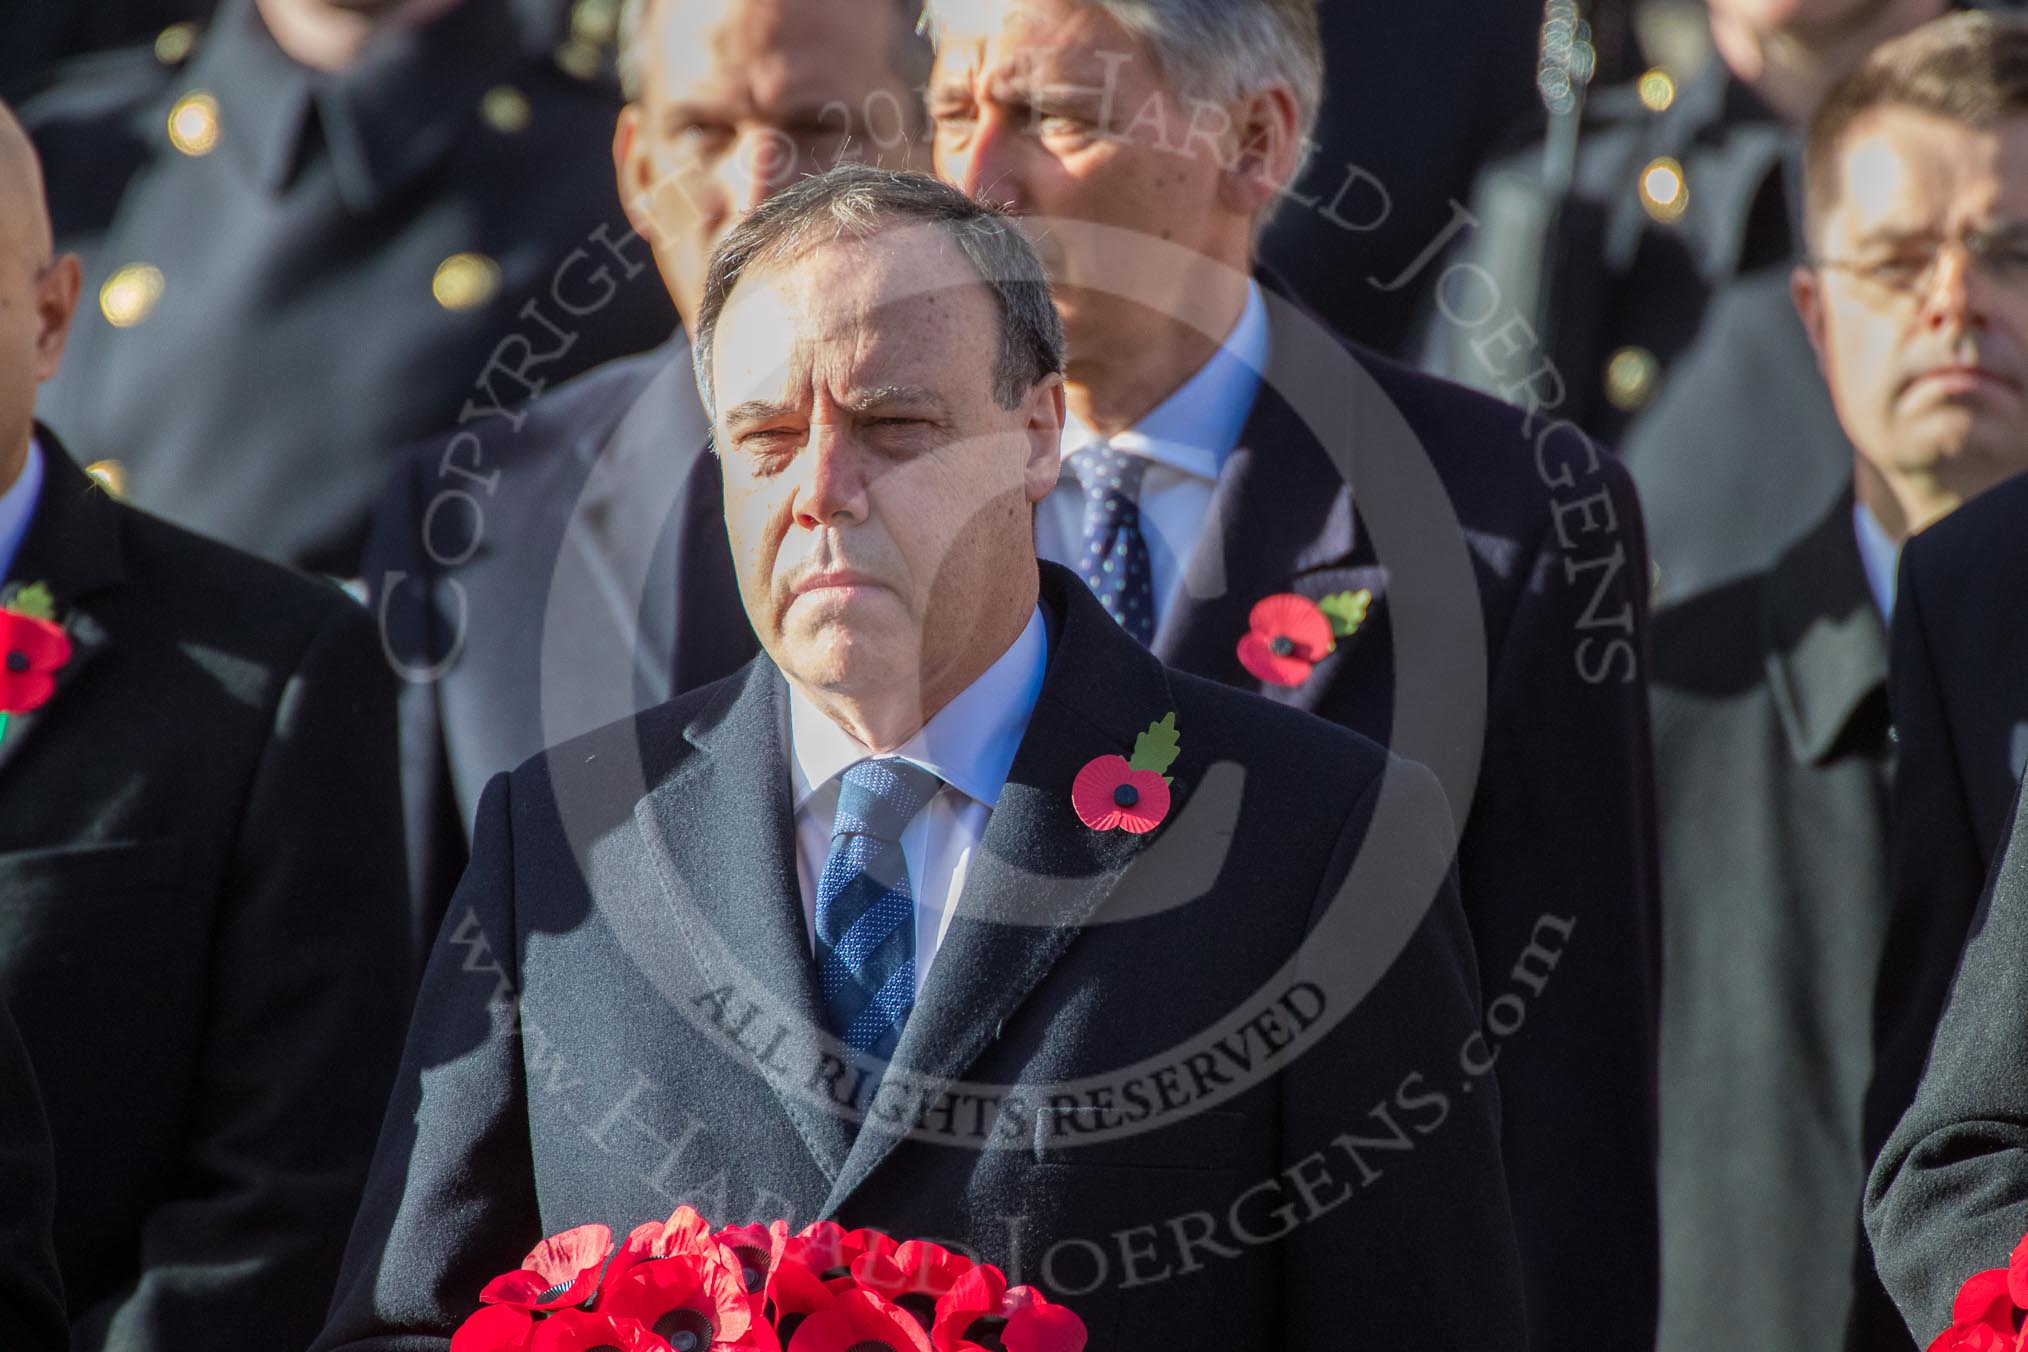 The Rt Hon Nigel Dodds OBE MP (Westminster Democratic Unionist Party Leader) during the Remembrance Sunday Cenotaph Ceremony 2018 at Horse Guards Parade, Westminster, London, 11 November 2018, 11:03.